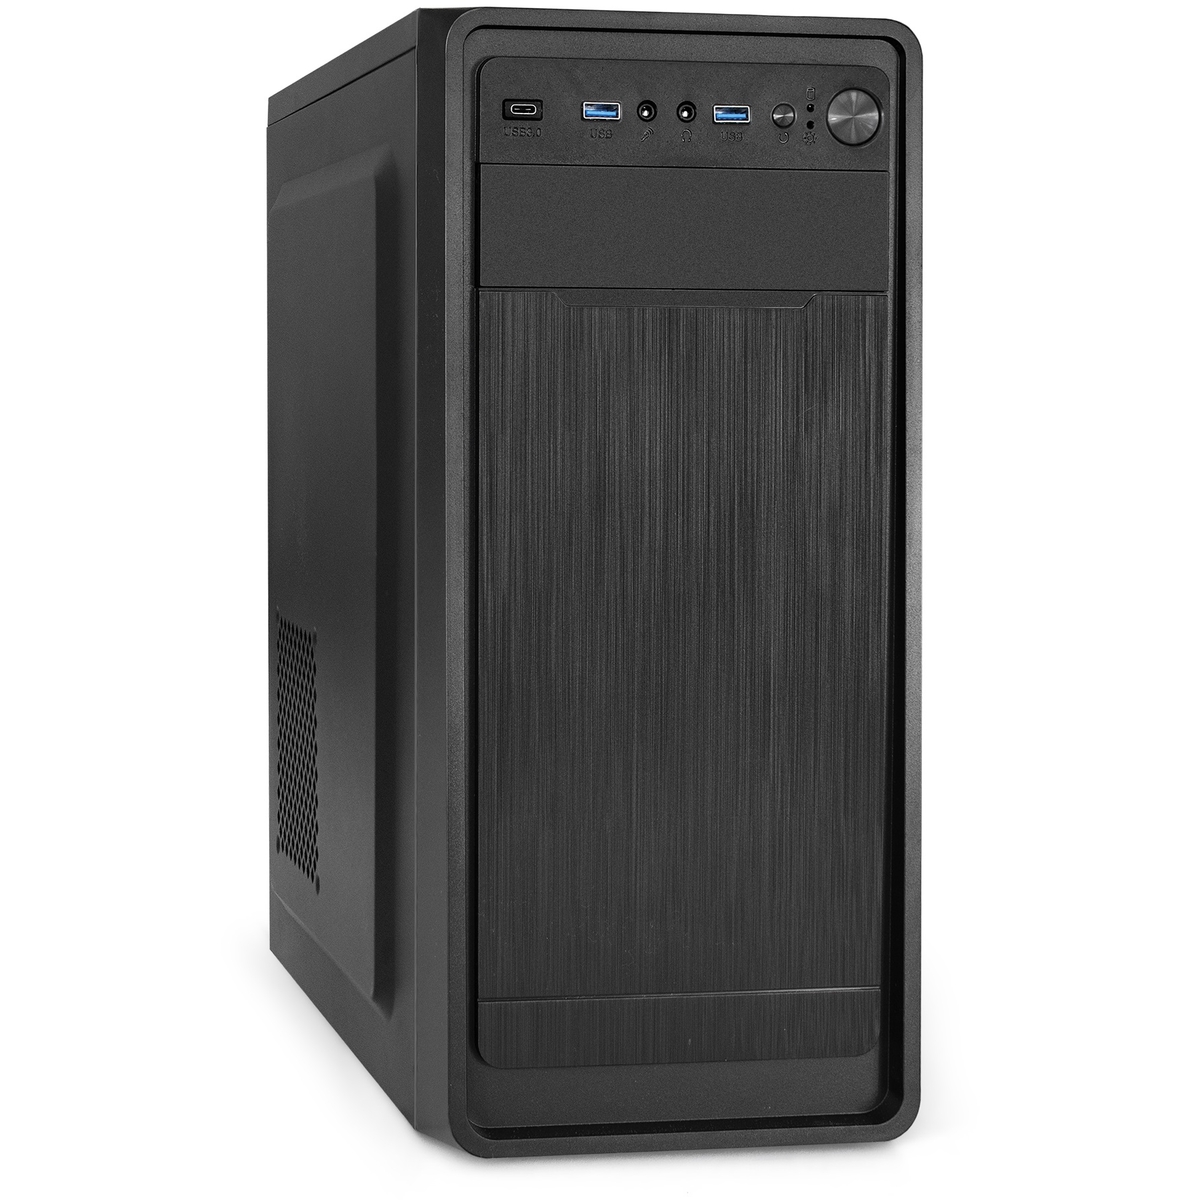 Miditower ExeGate XP-332UC-XP350